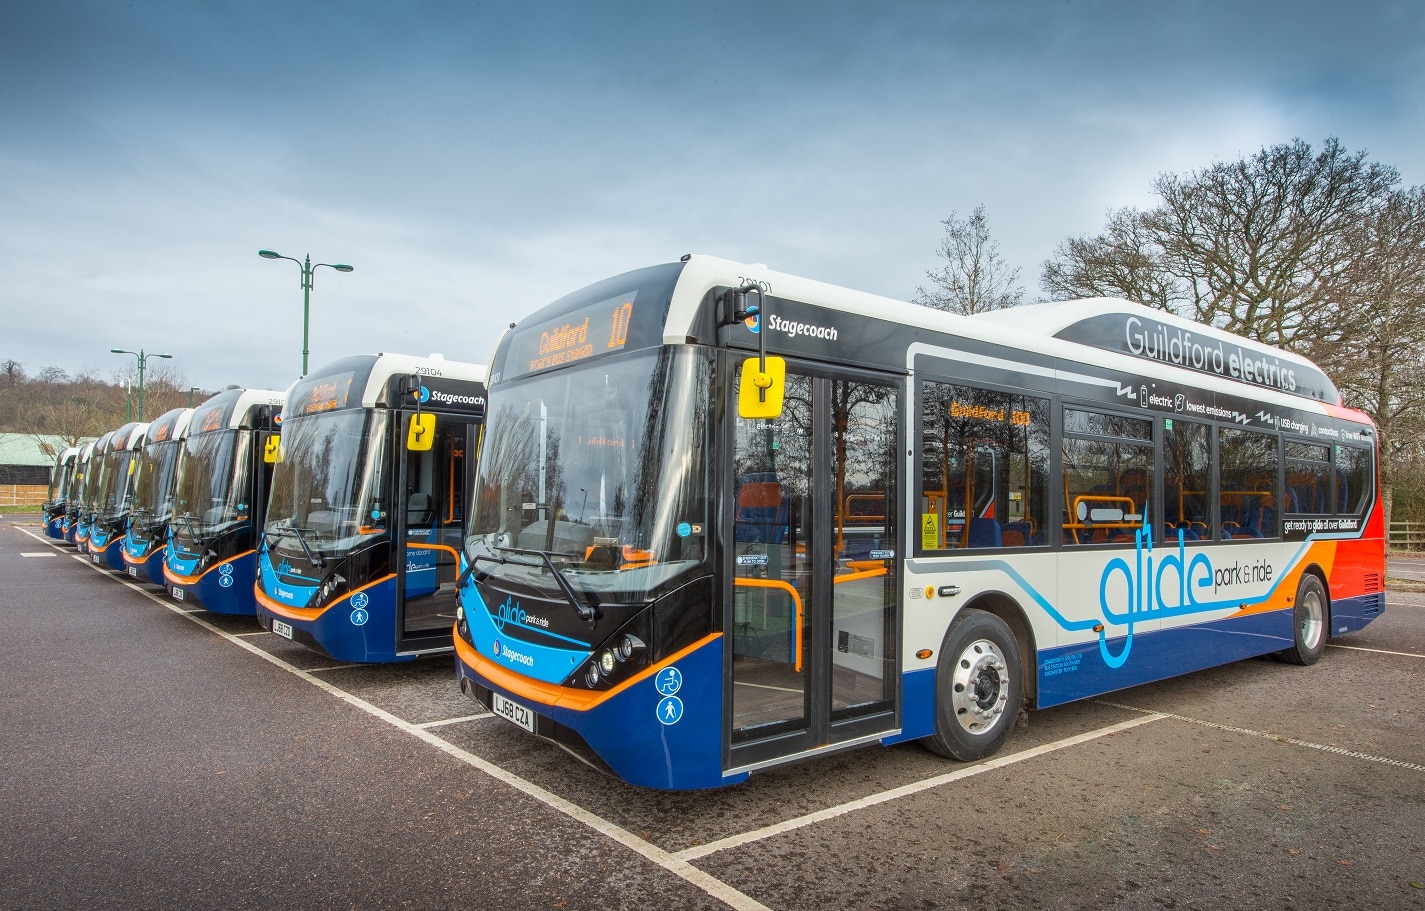 Stagecoach South battery-electric bus in Guildford